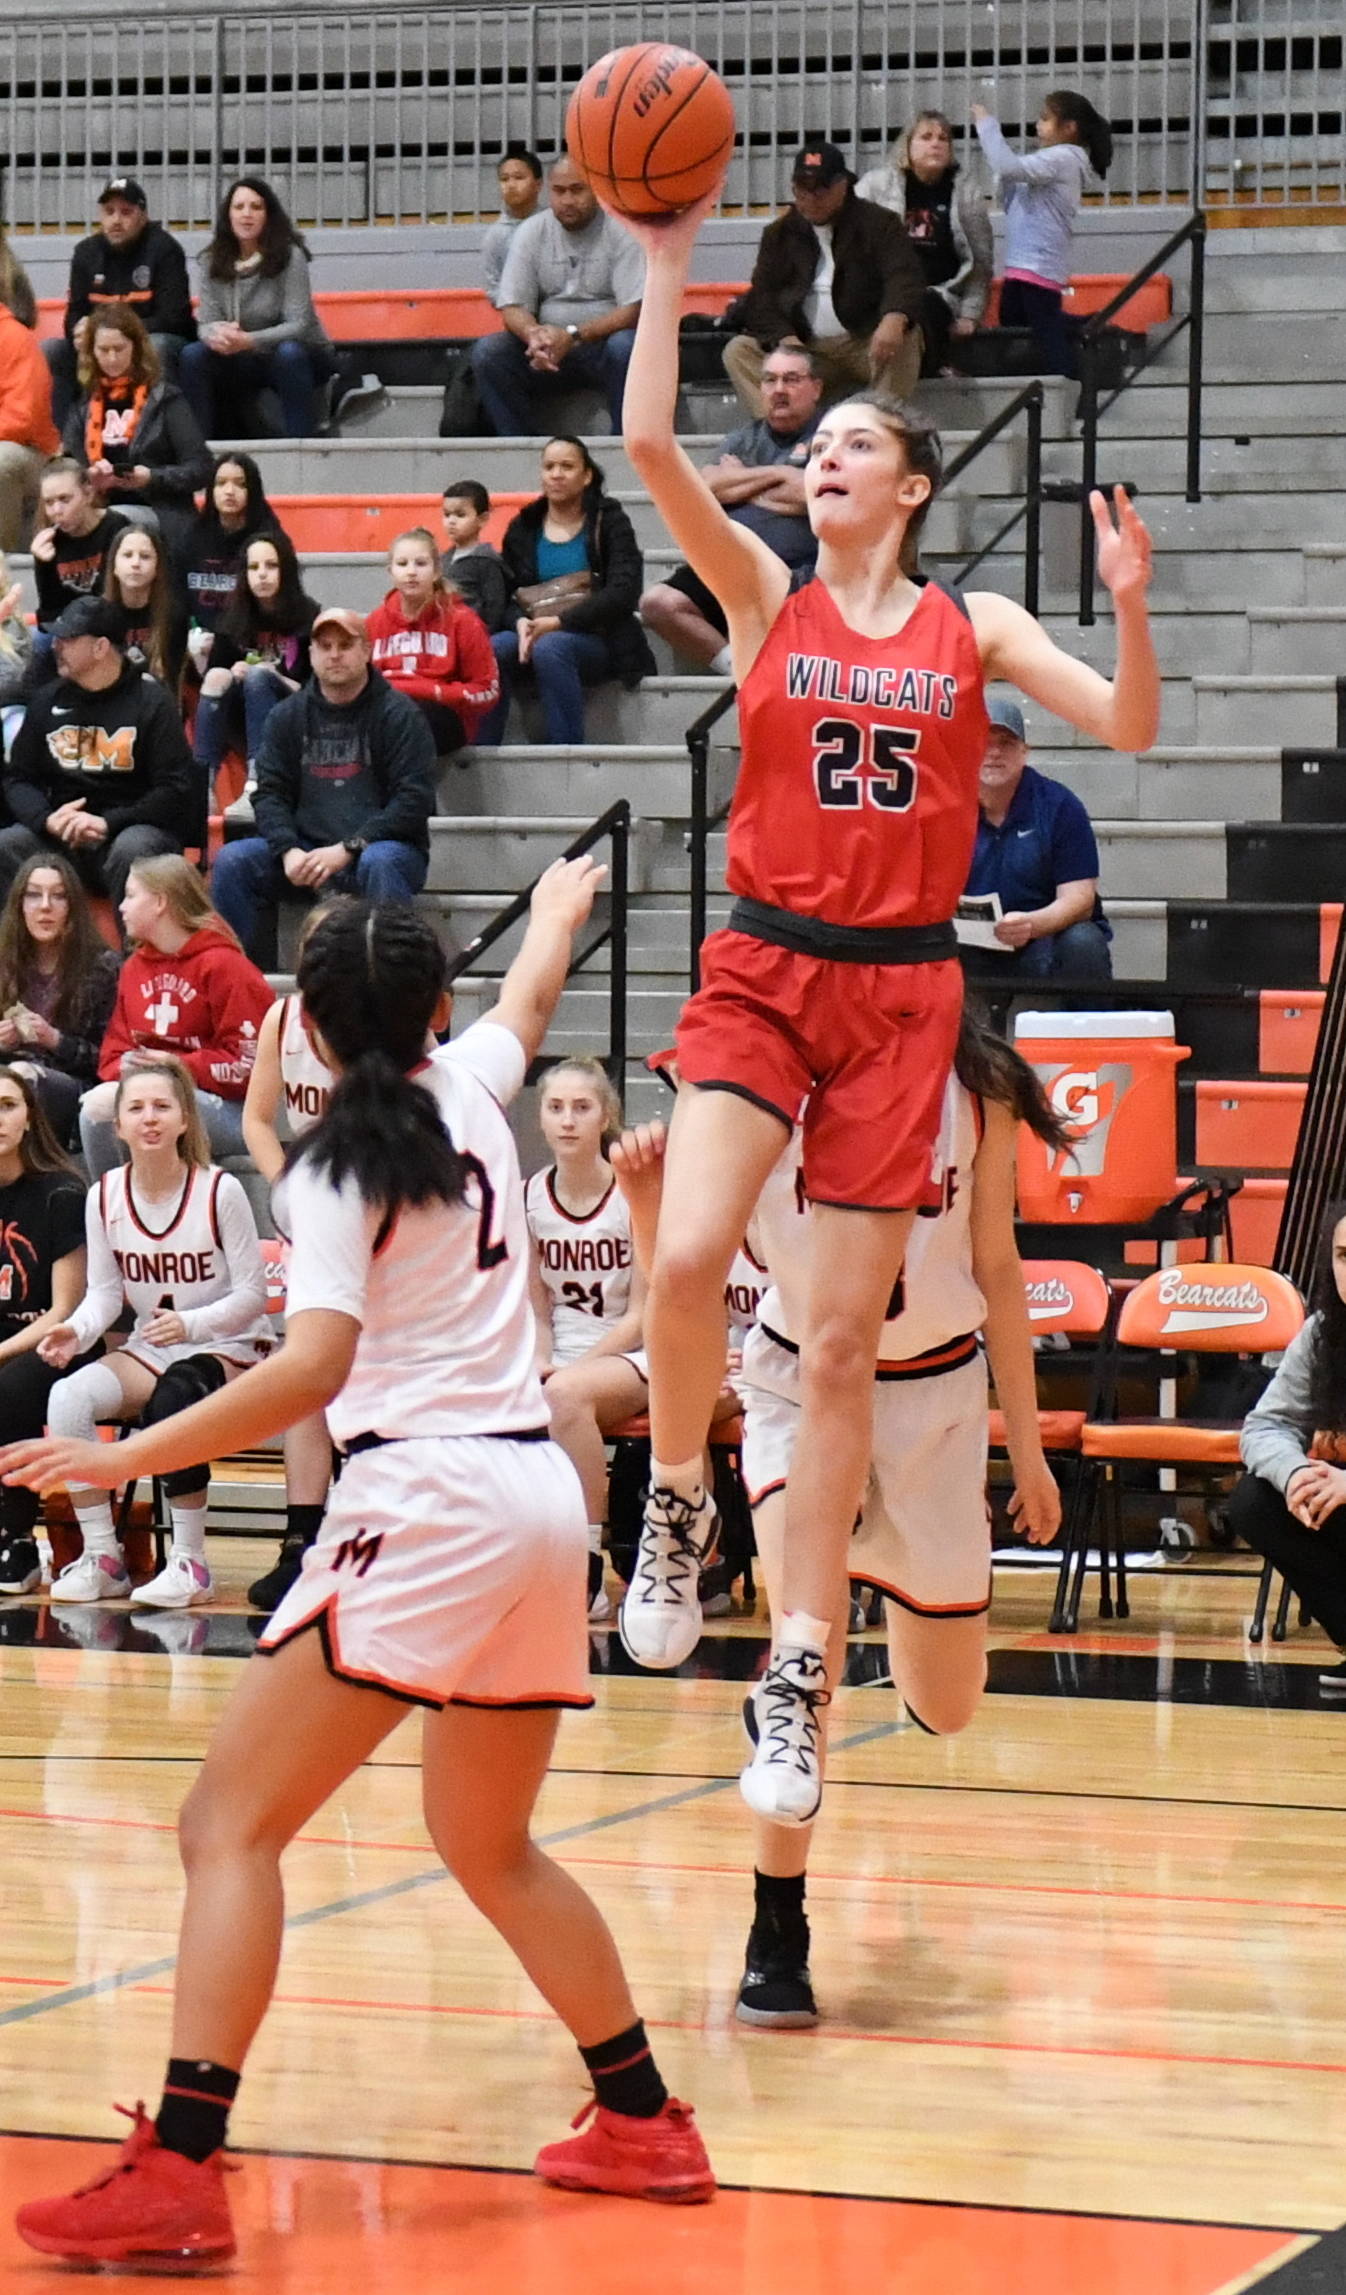 Mount Si sophomore Lauren Glazier takes a shot during the Wildcats’ 55-44 victory over Monroe on Feb. 14. Photo courtesy of Calder Productions